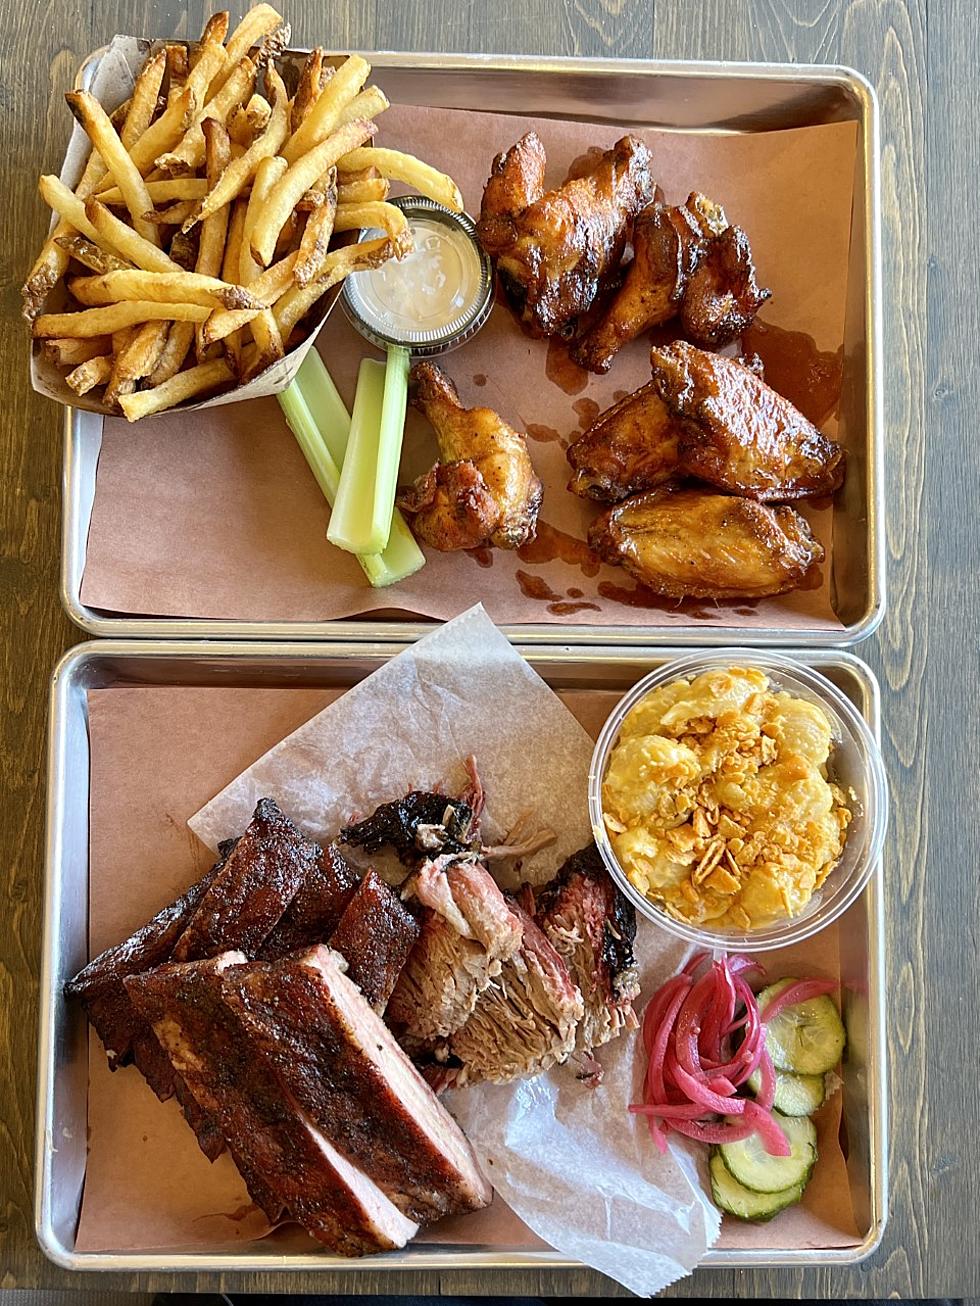 Local Asbury Park BBQ Restaurant Delivers on Flavor Grand Opening Day